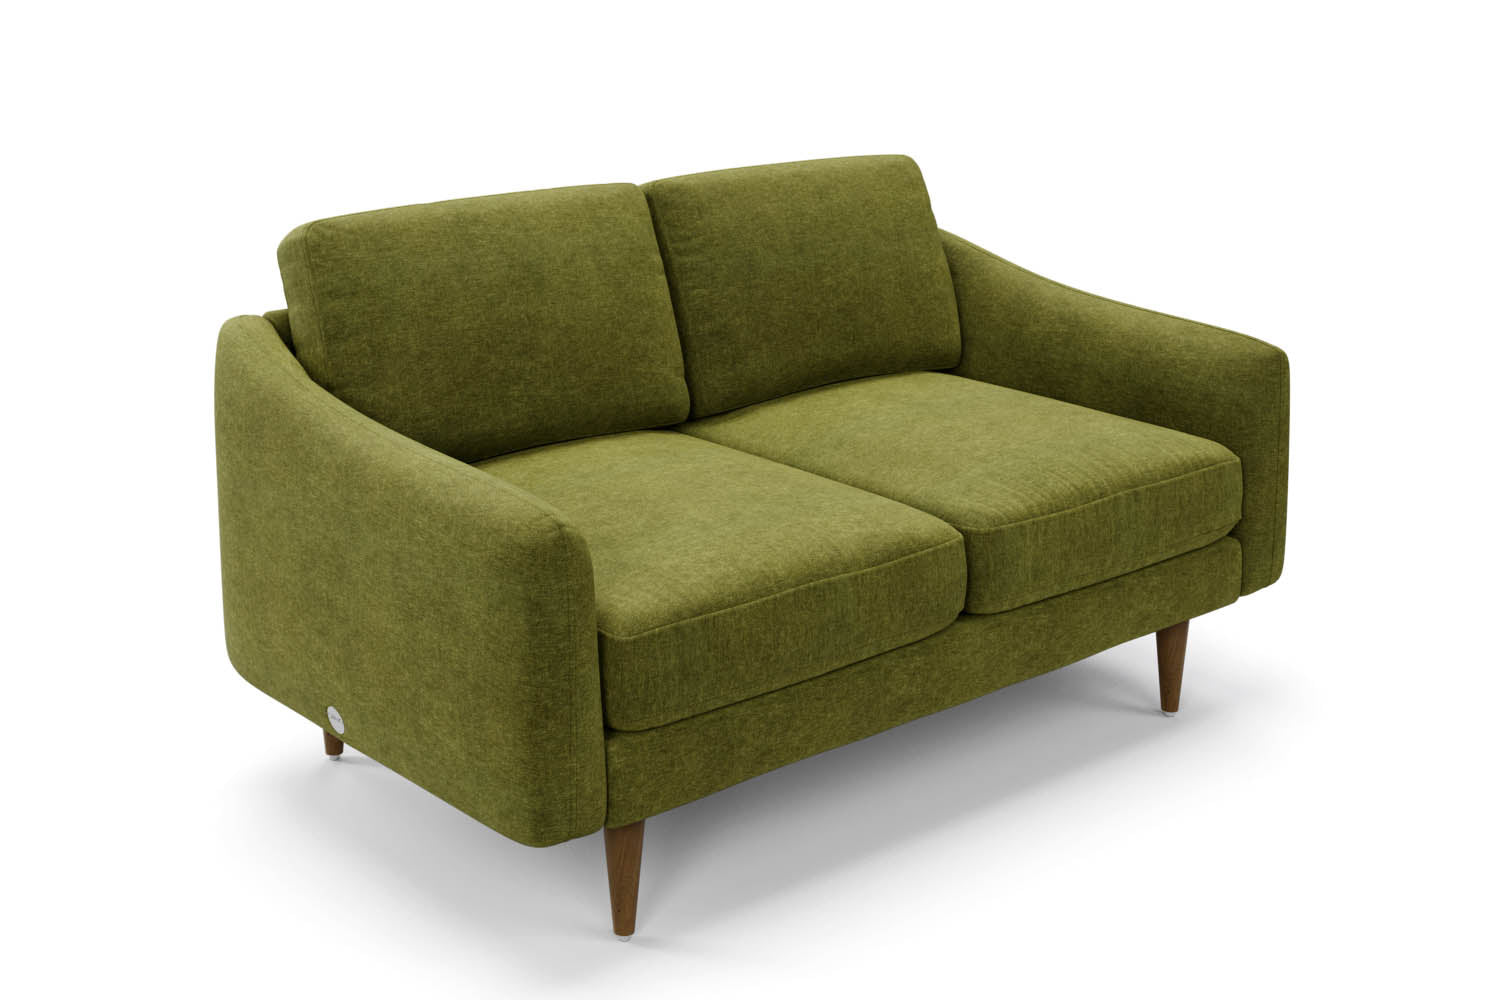 The Rebel 2 Seater Sofa in Moss with brown legs